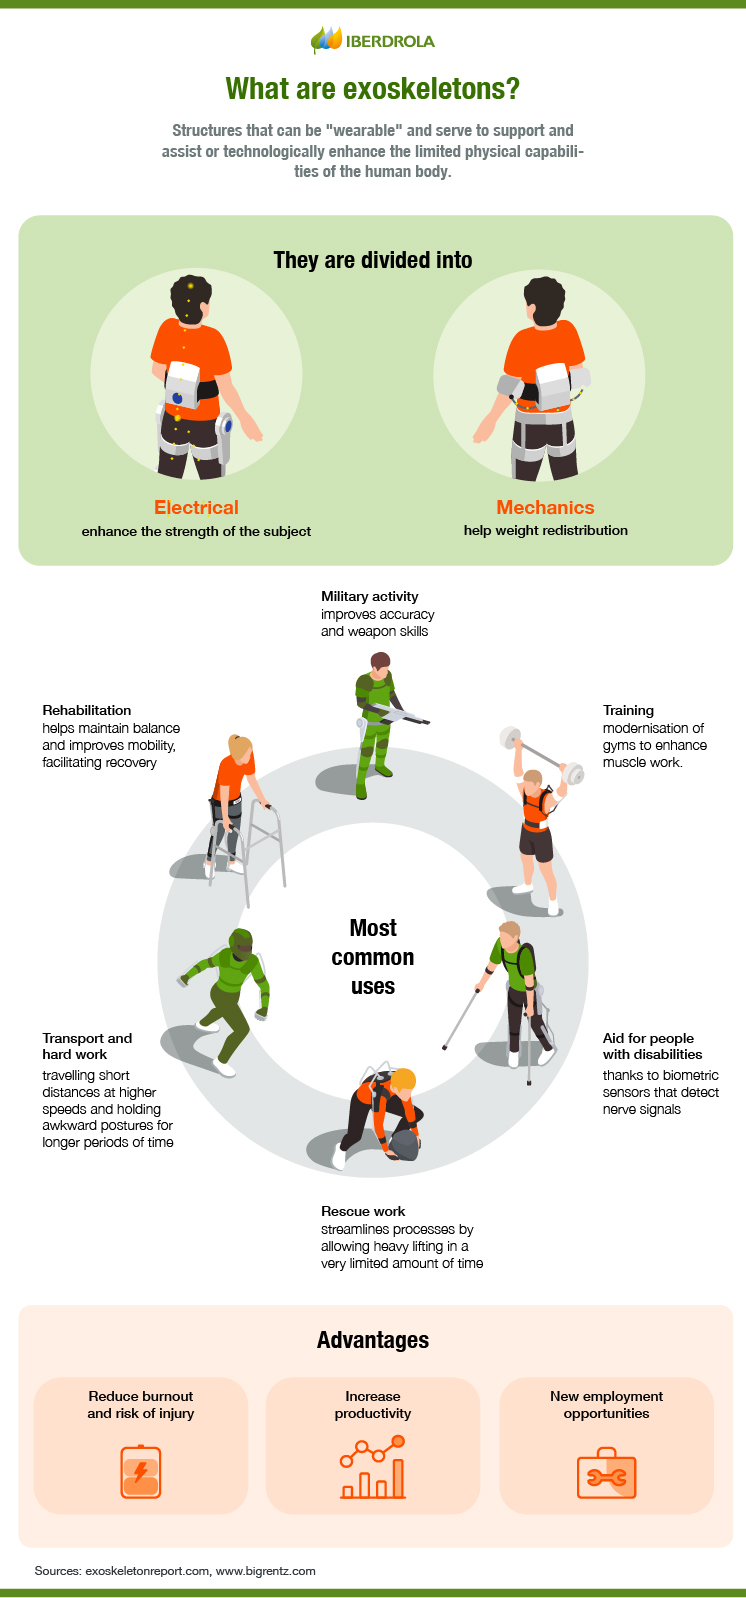 Different types of exoskeletons, applications and advantages.